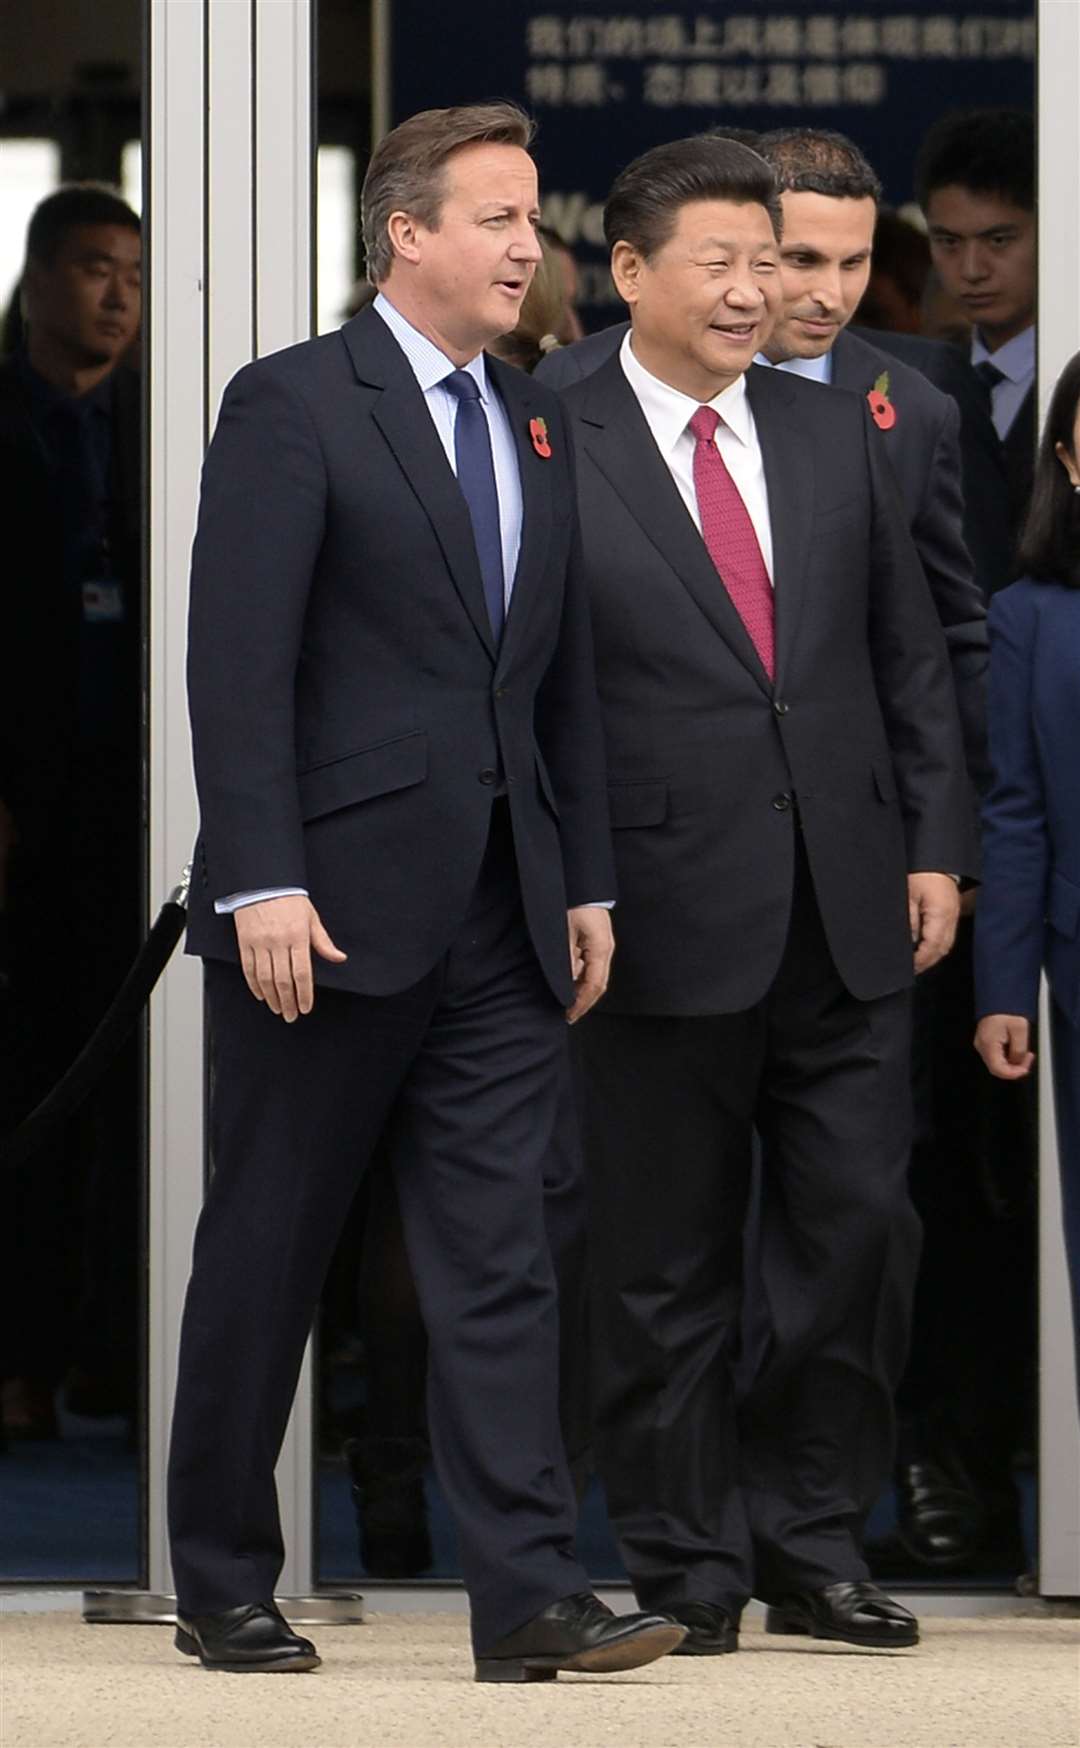 Then-prime minister David Cameron with Chinese President Xi Jinping (Joe Giddens/PA)